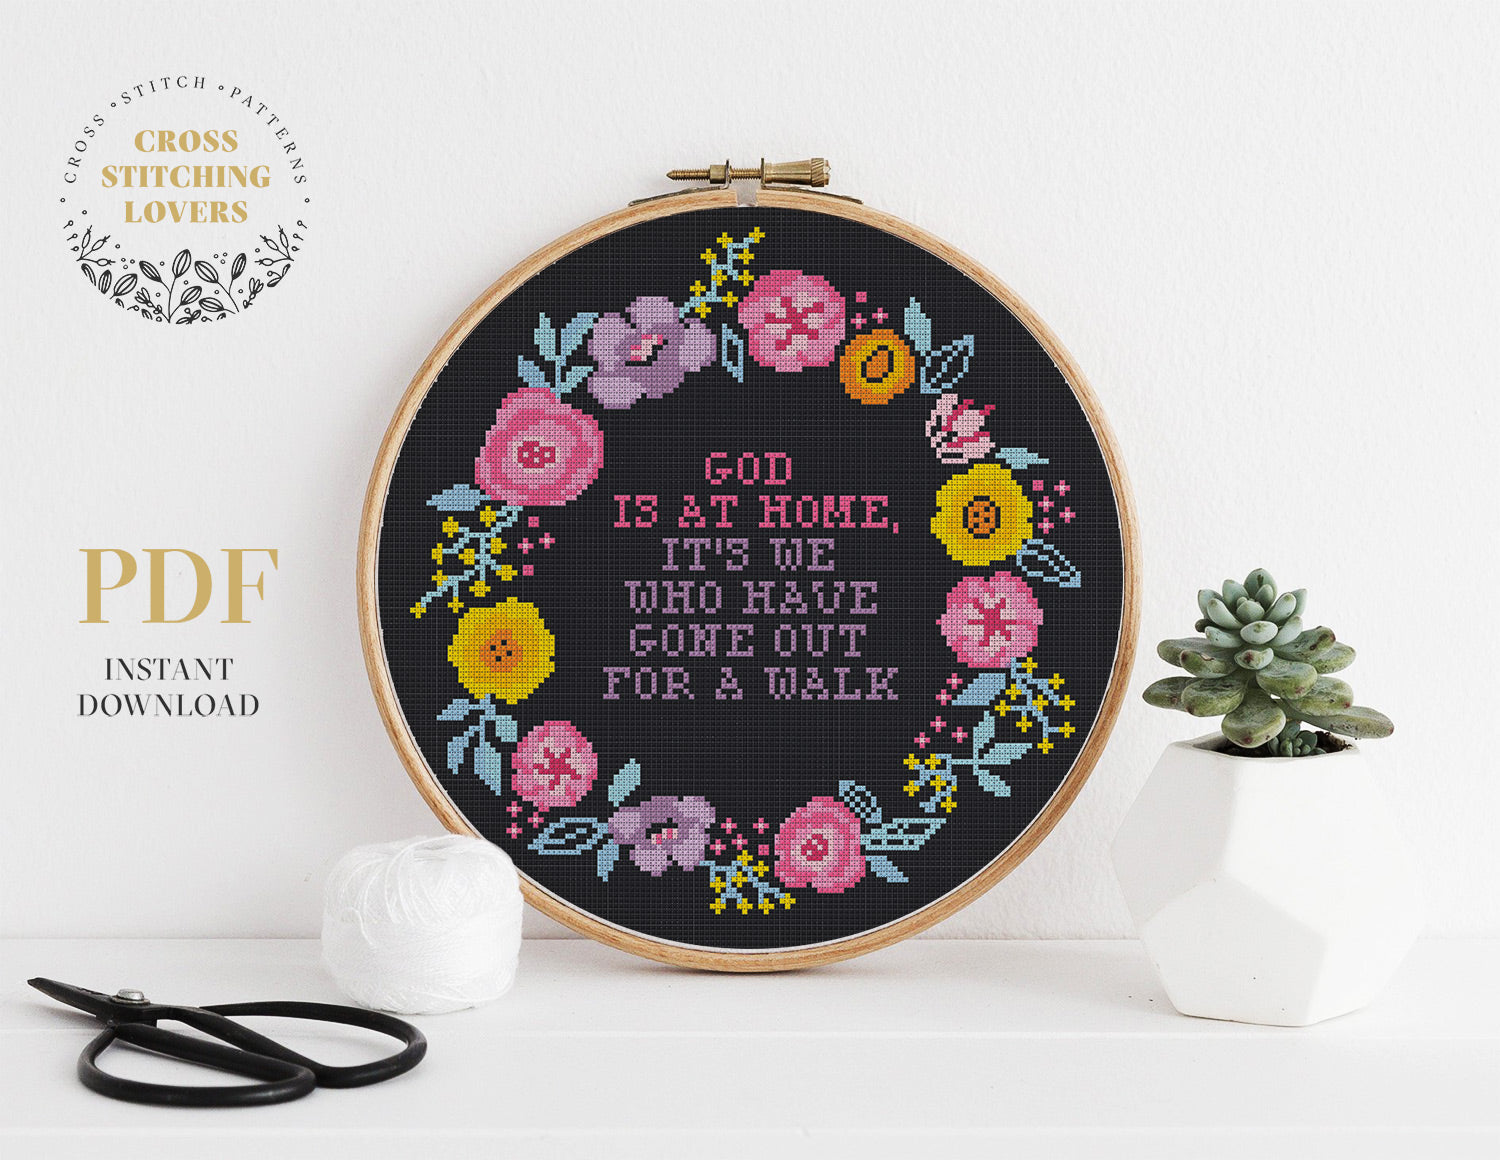 God is at home - Cross stitch pattern